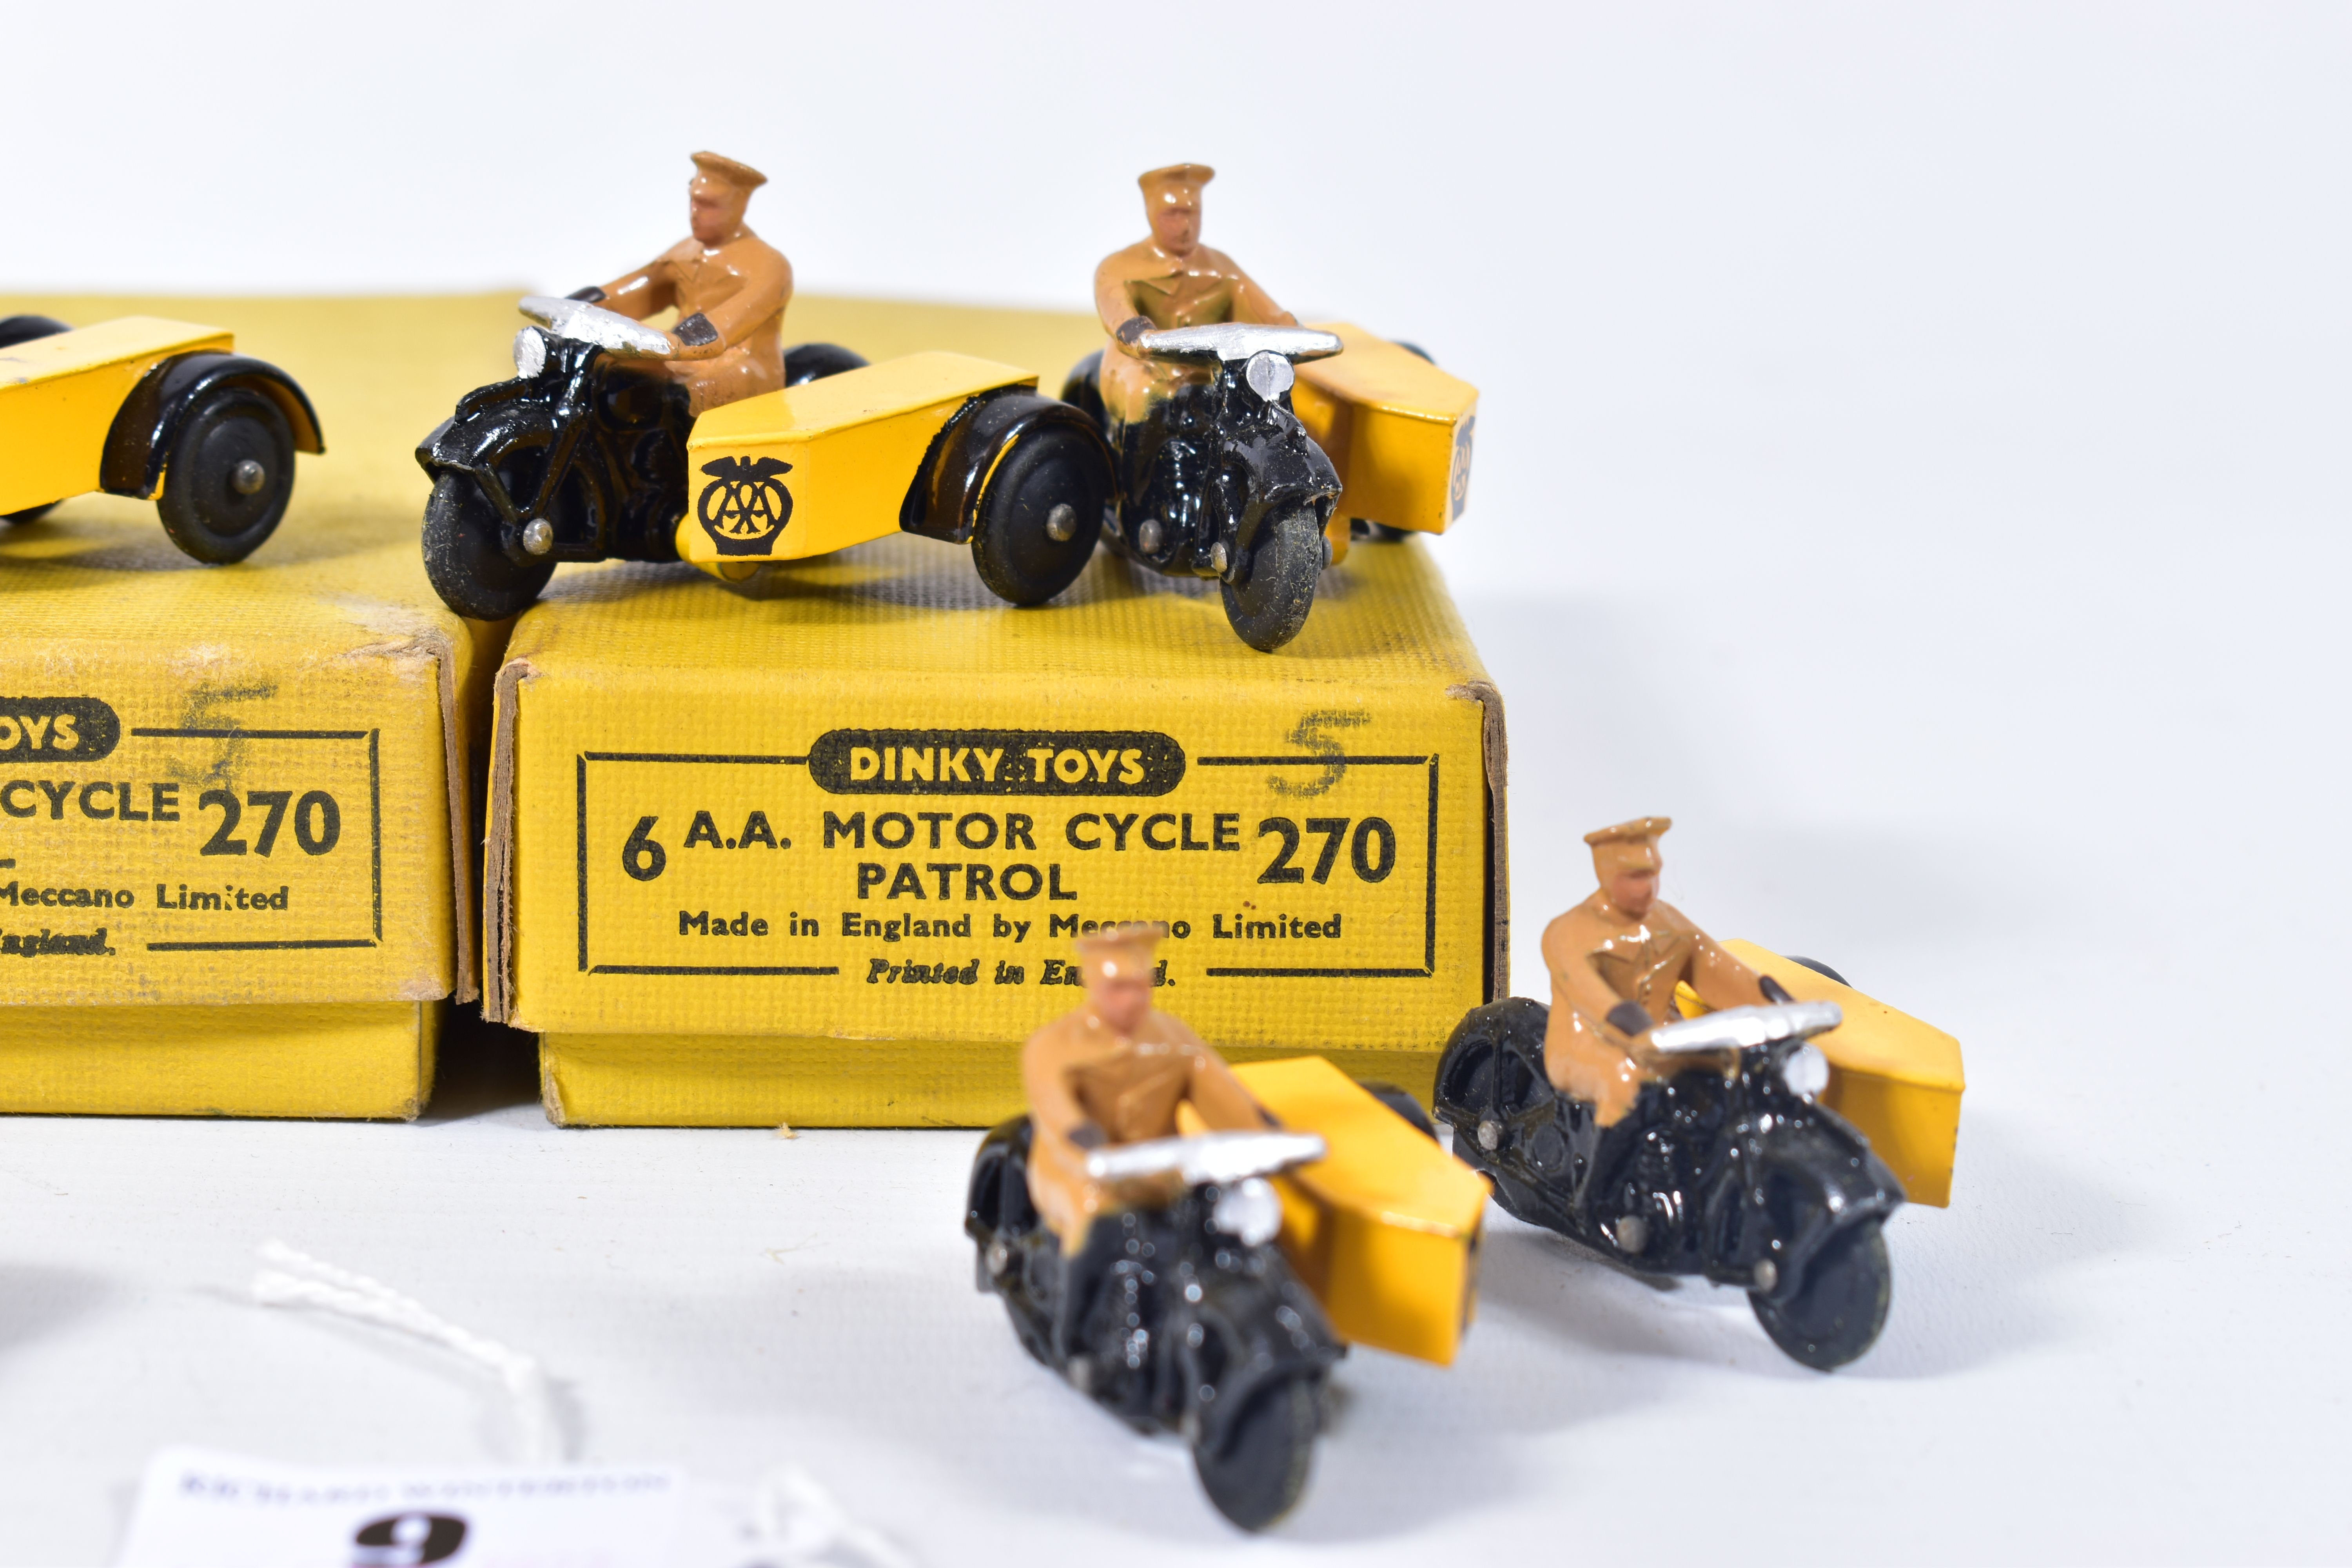 A DINKY TOYS TRADE BOX OF SIX A.A MOTORCYCLE PATROL, No.270, complete with all six models in very - Bild 3 aus 6